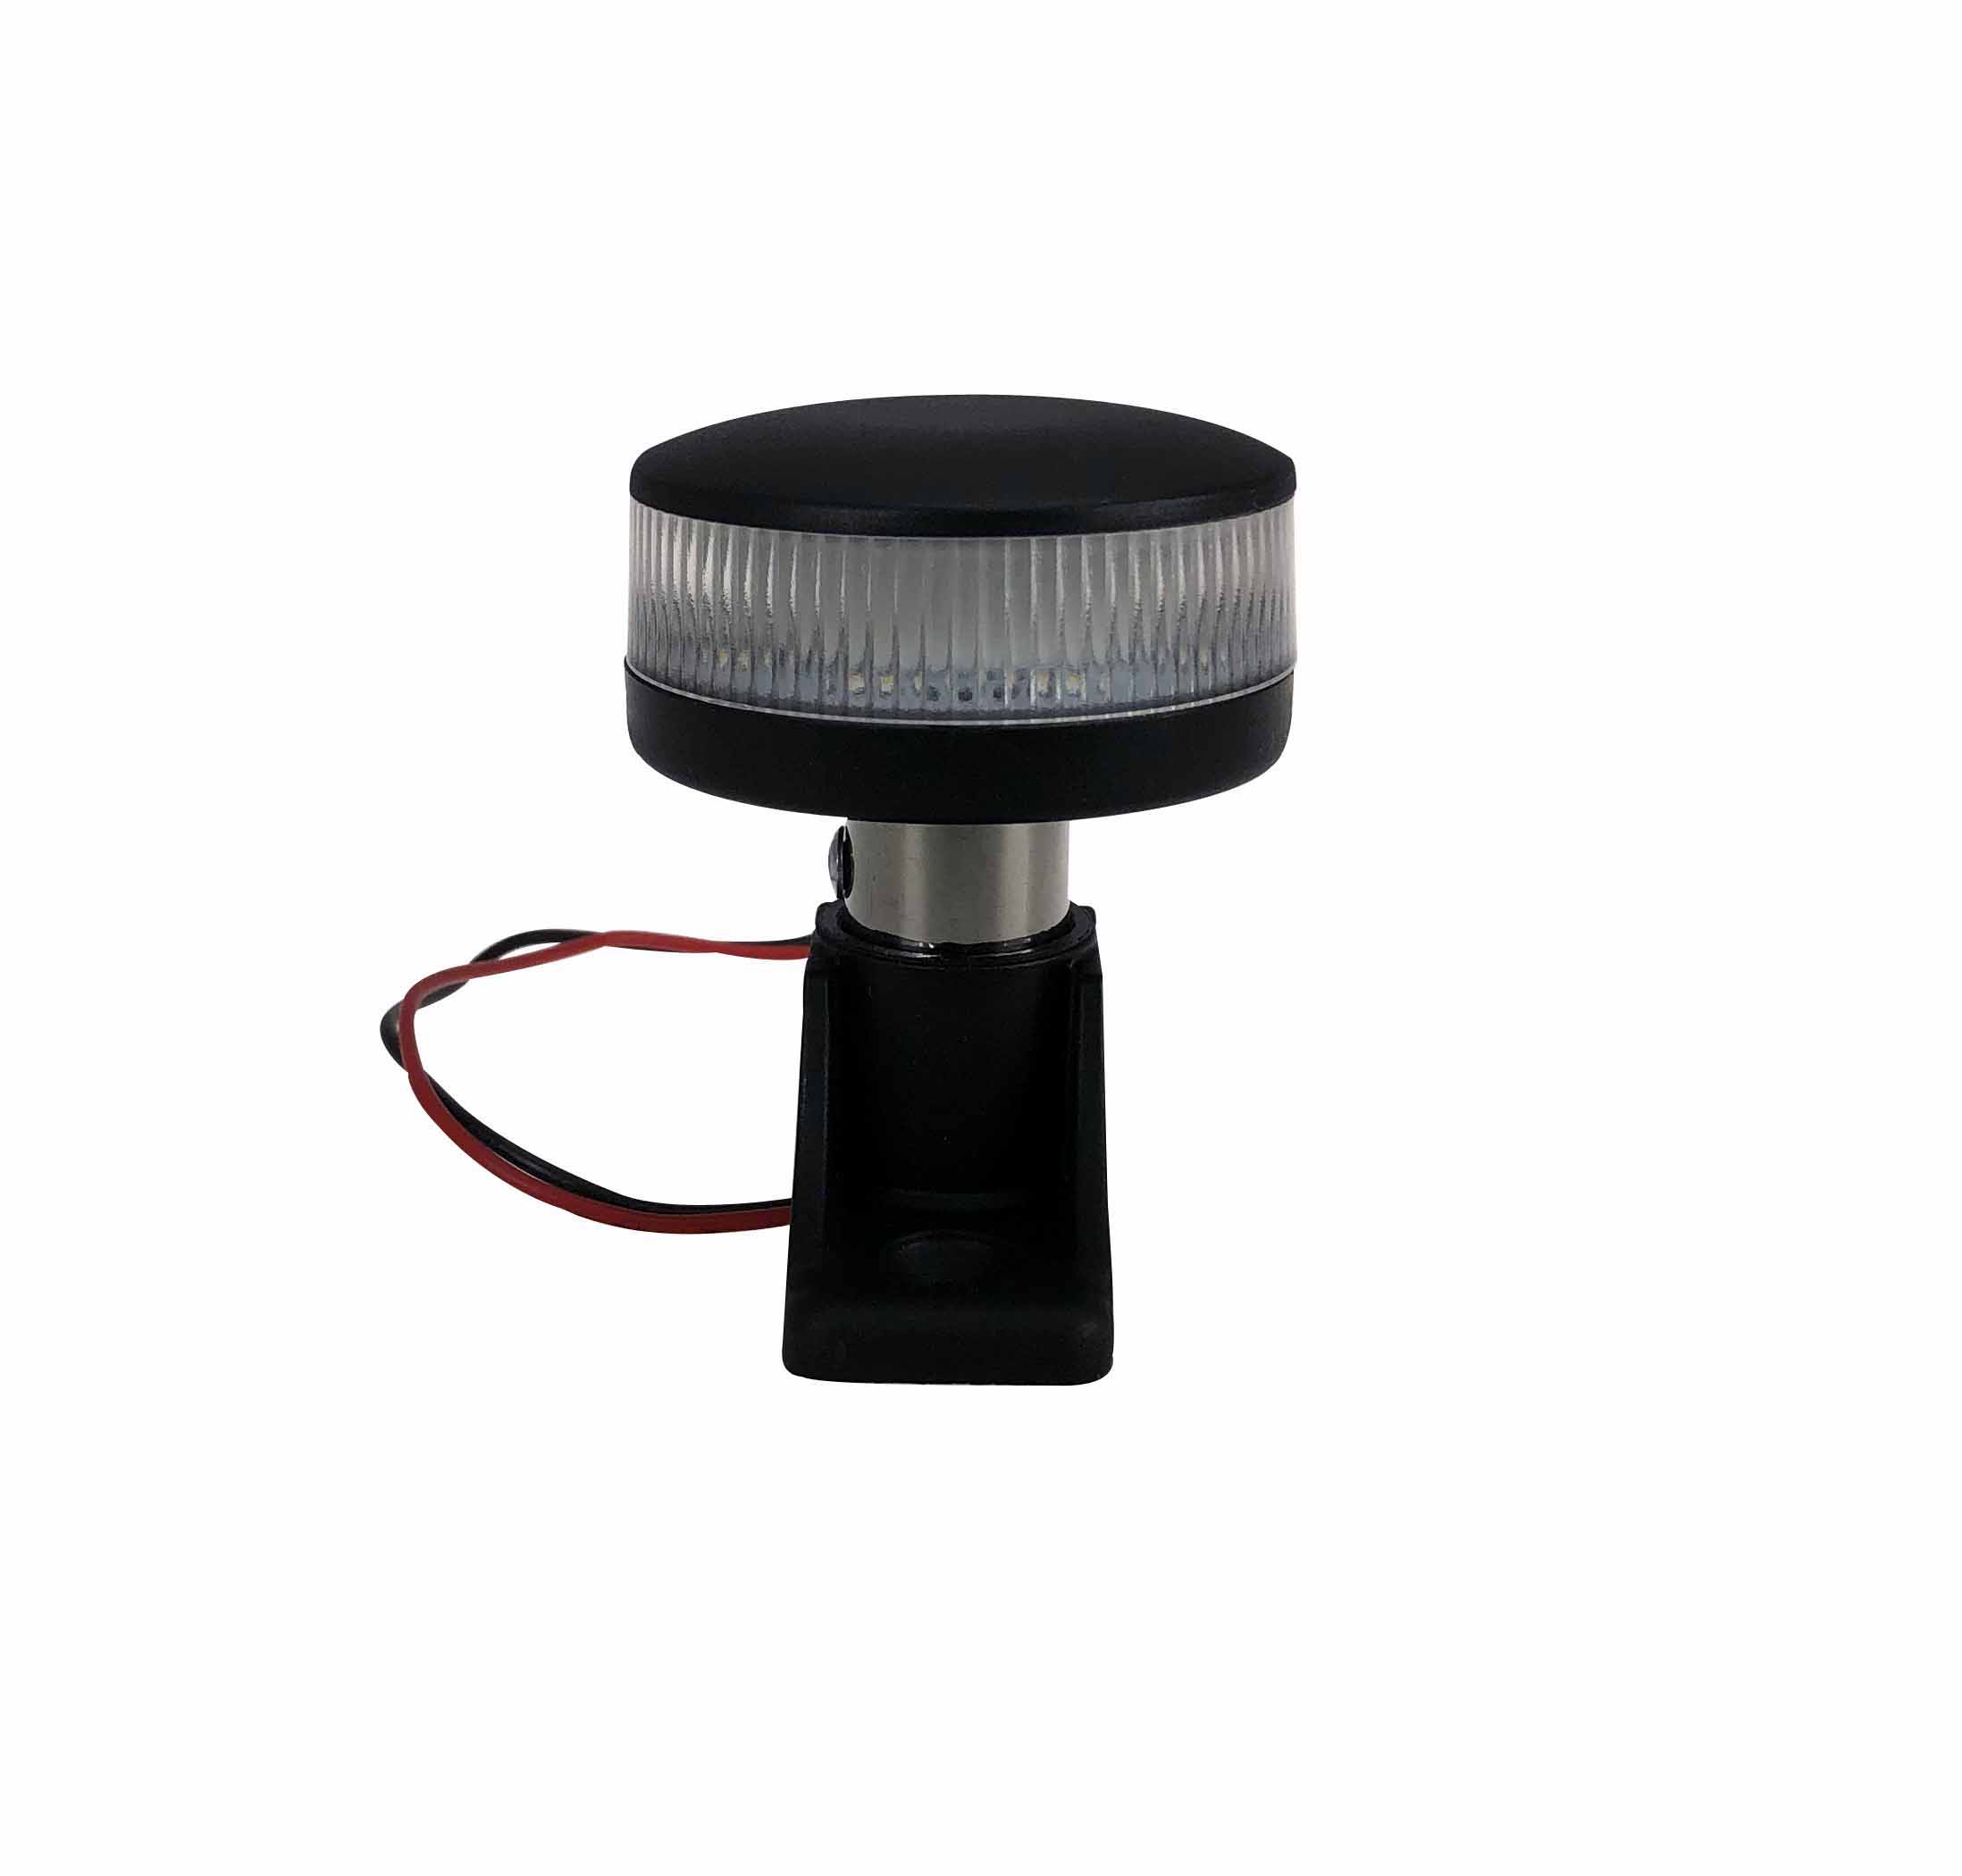 Pactrade Marine Boat LED All Round LED Navigation Light SS Pole